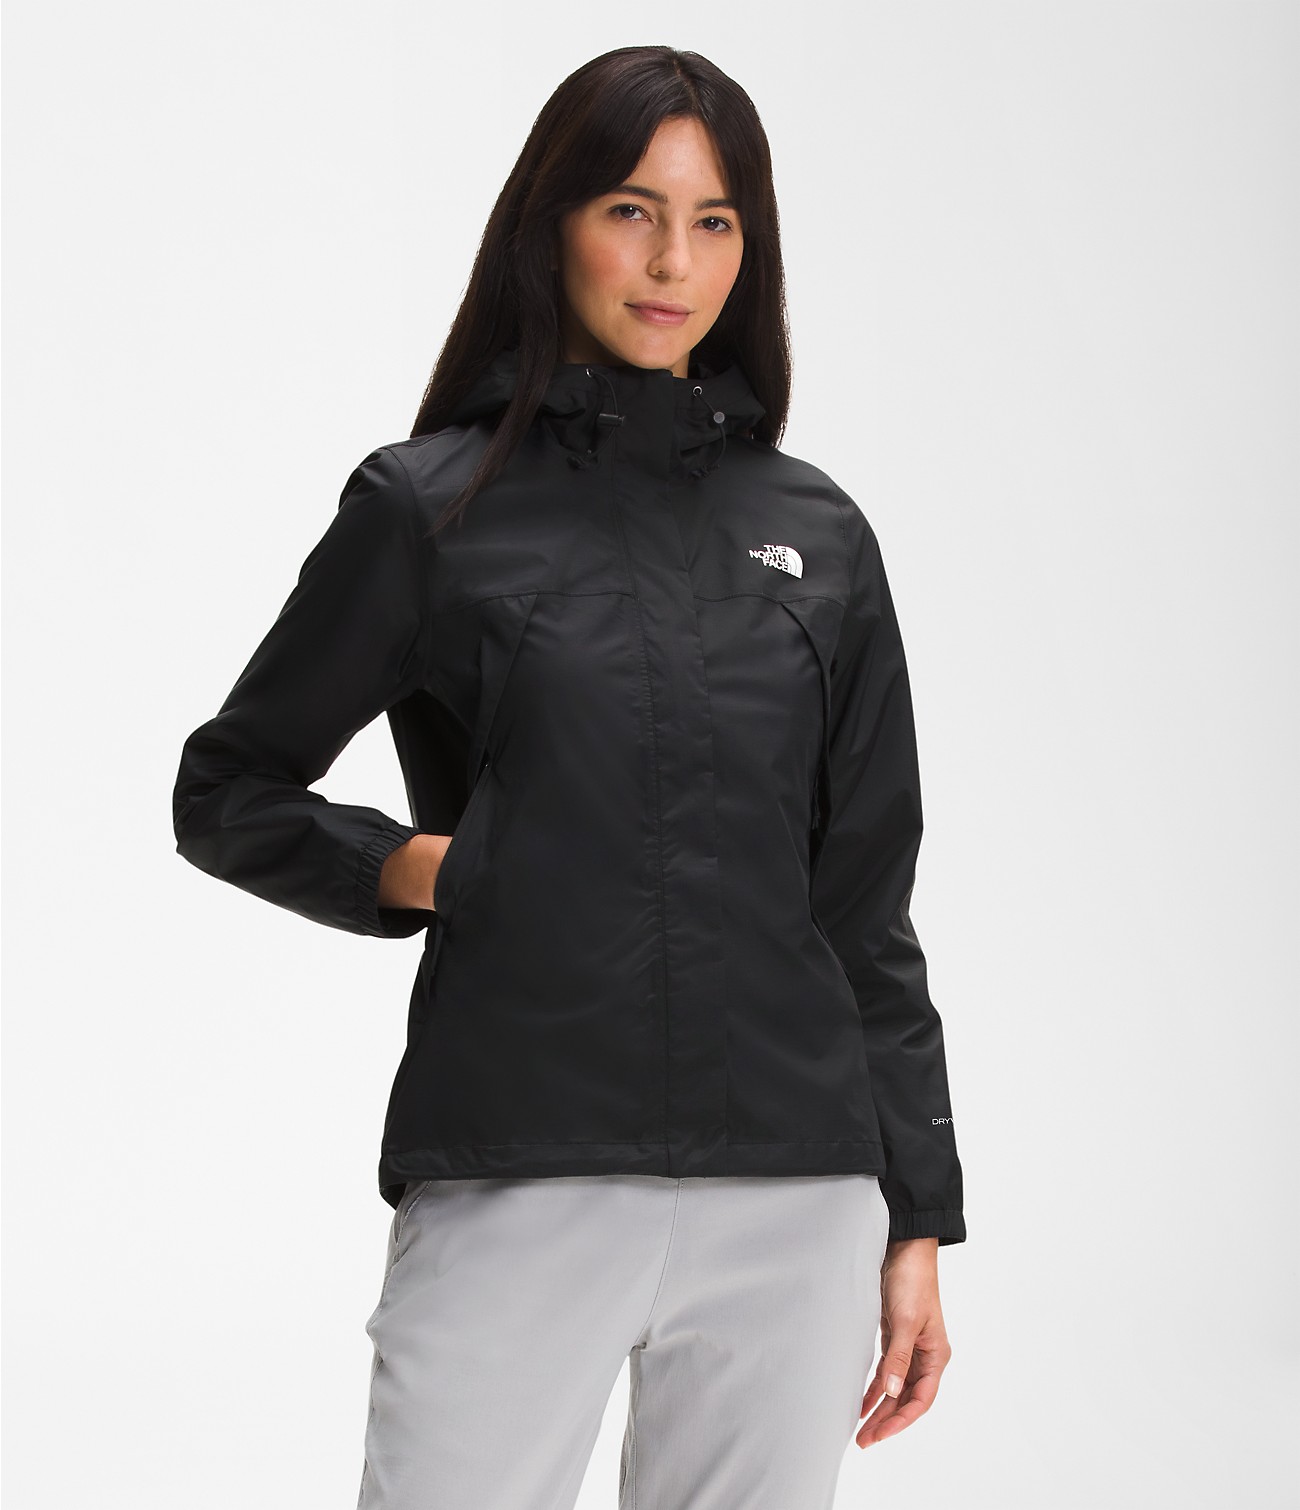 Unlock Wilderness' choice in the Rab Vs North Face comparison, the Antora Jacket by The North Face